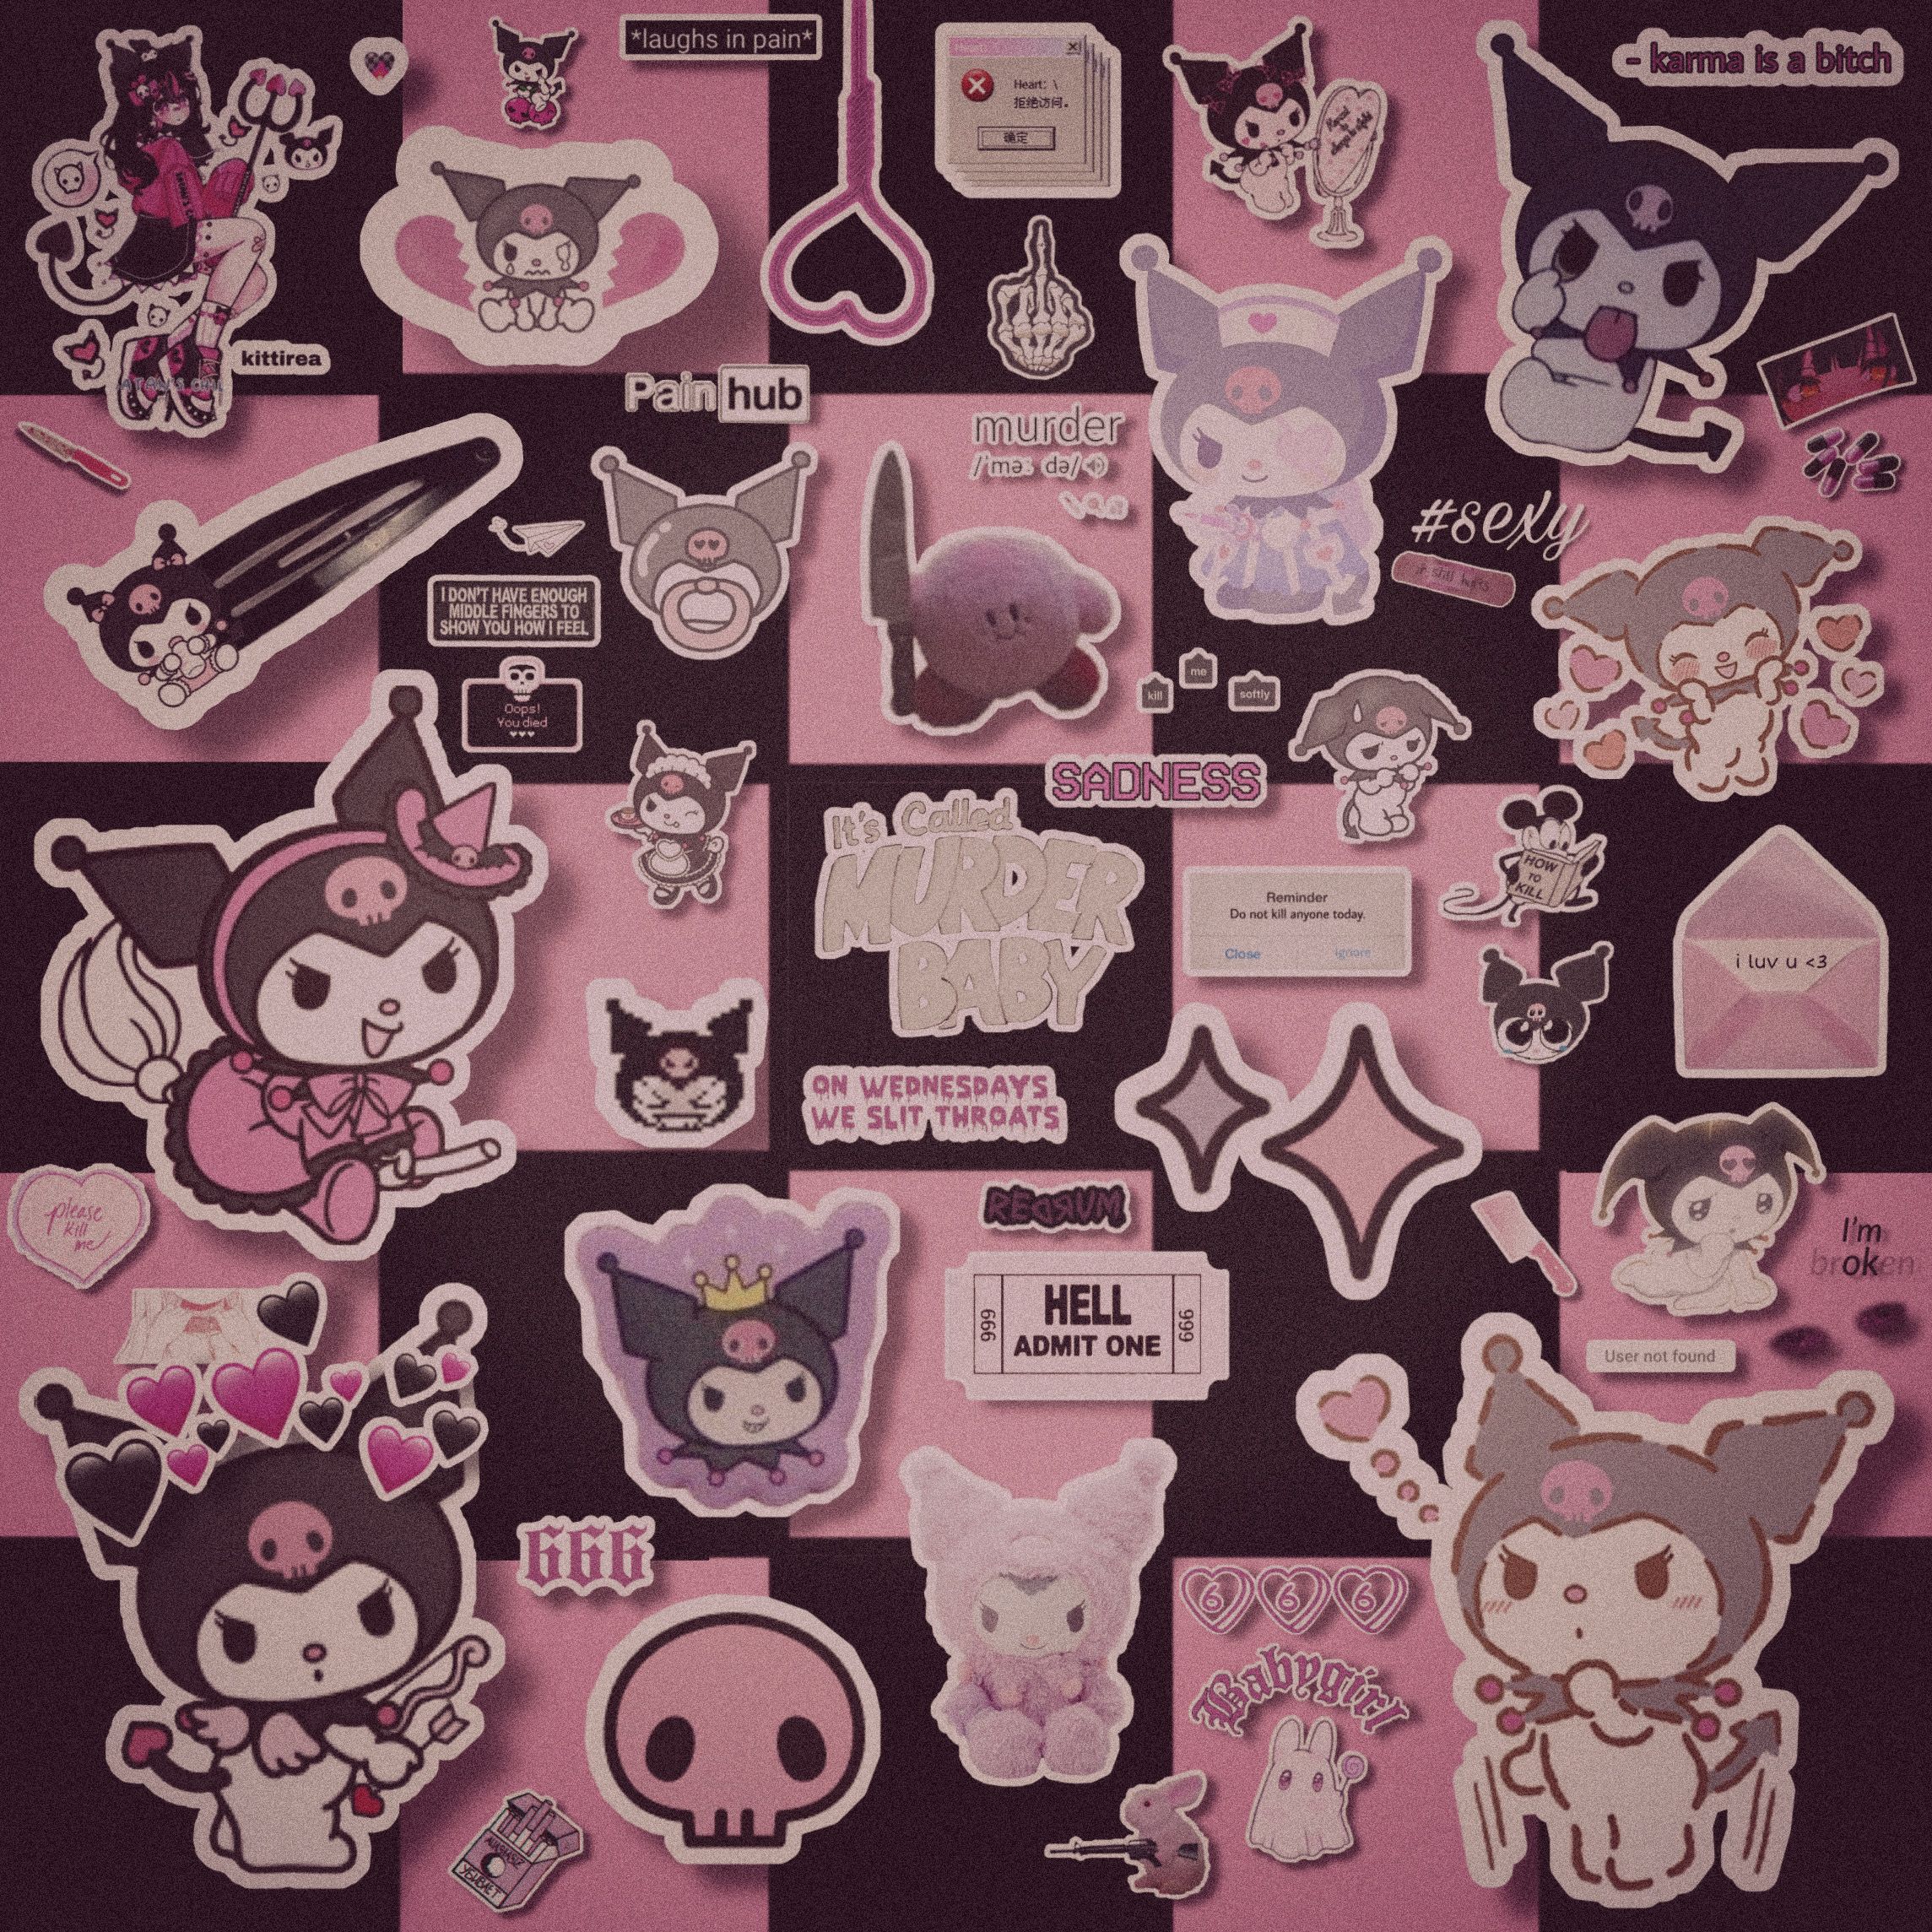 A sticker collage featuring Sanrio characters on a pink and black checkered background. - Kuromi